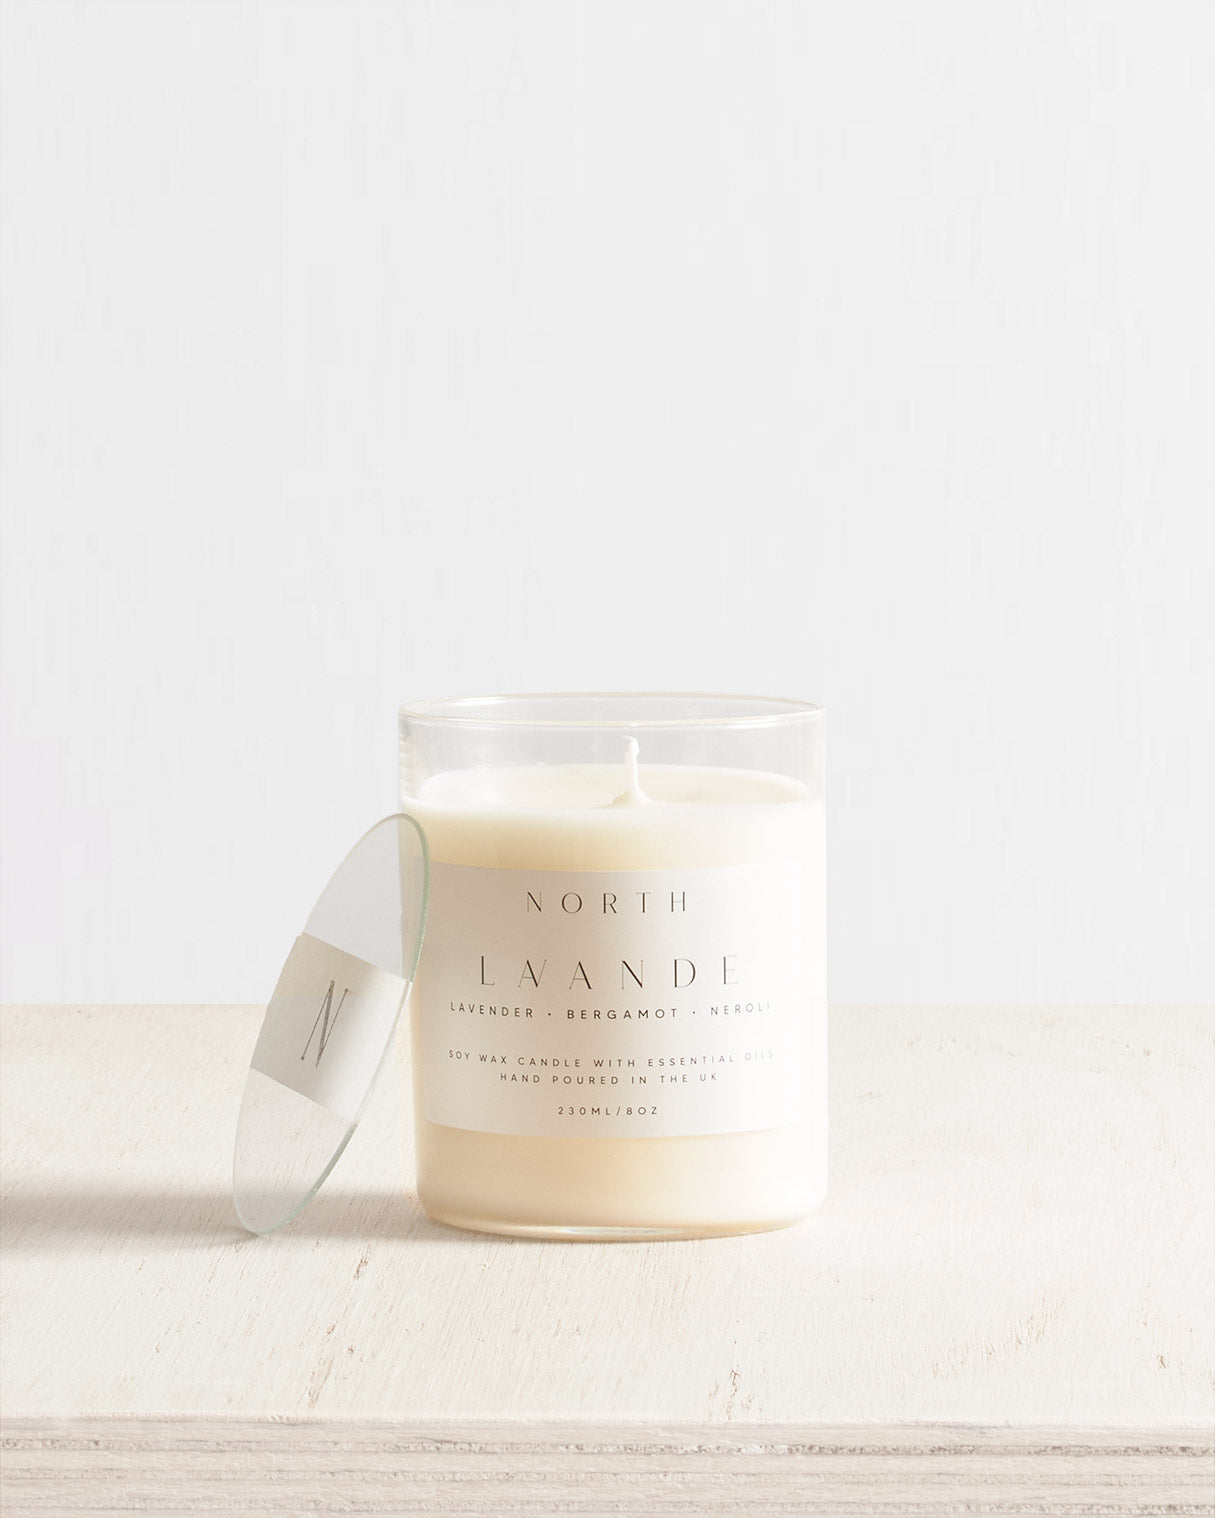 Lavande Soy Wax Scented Candle